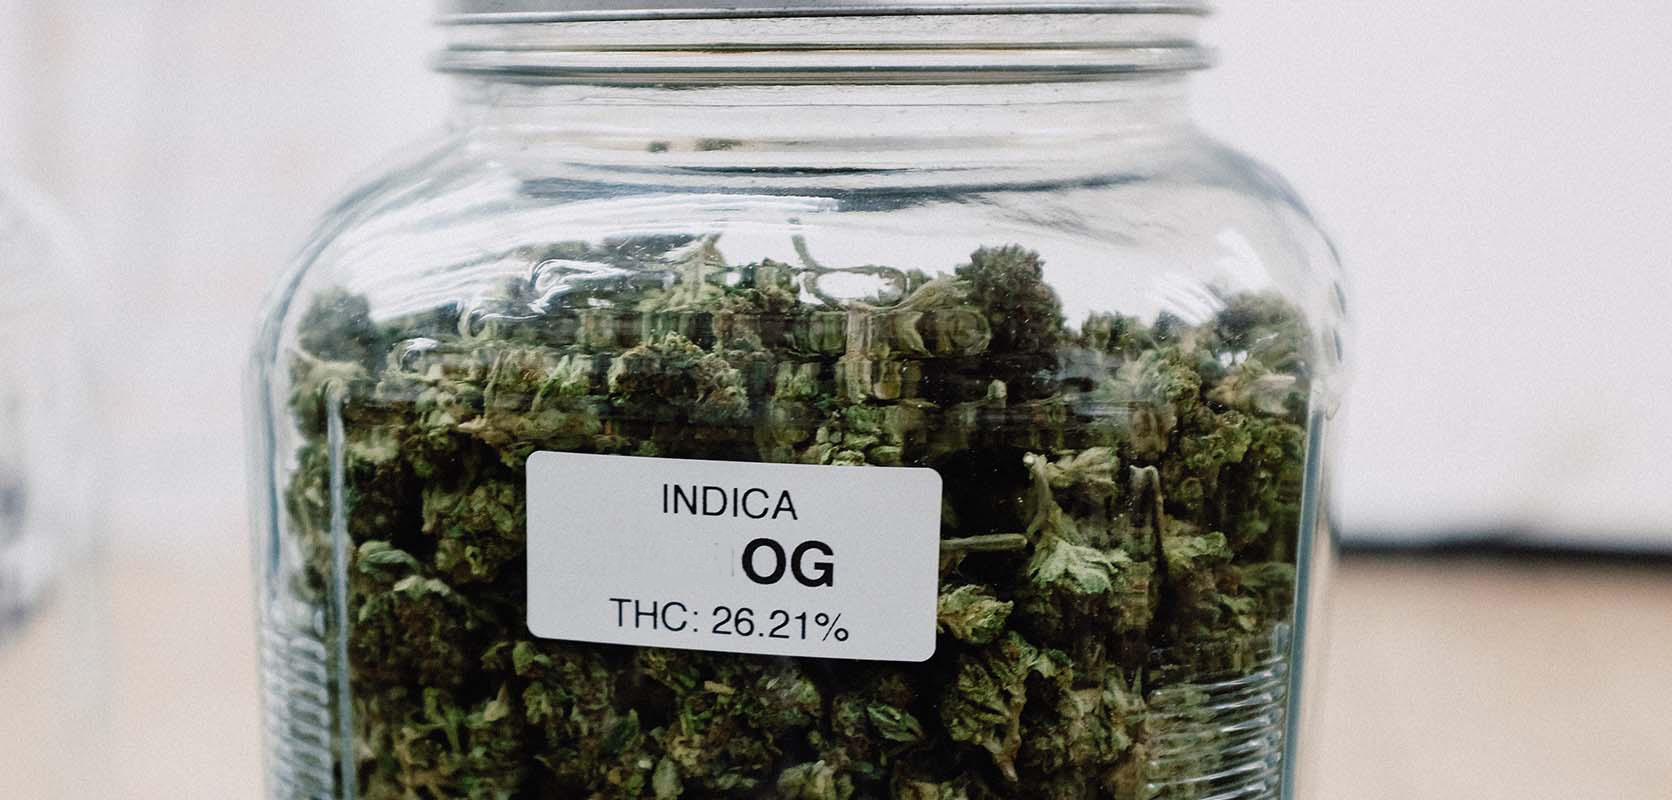 Indica Vs Sativa Vs Hybrids Is This Classification Necessary? Buy Weed Online.